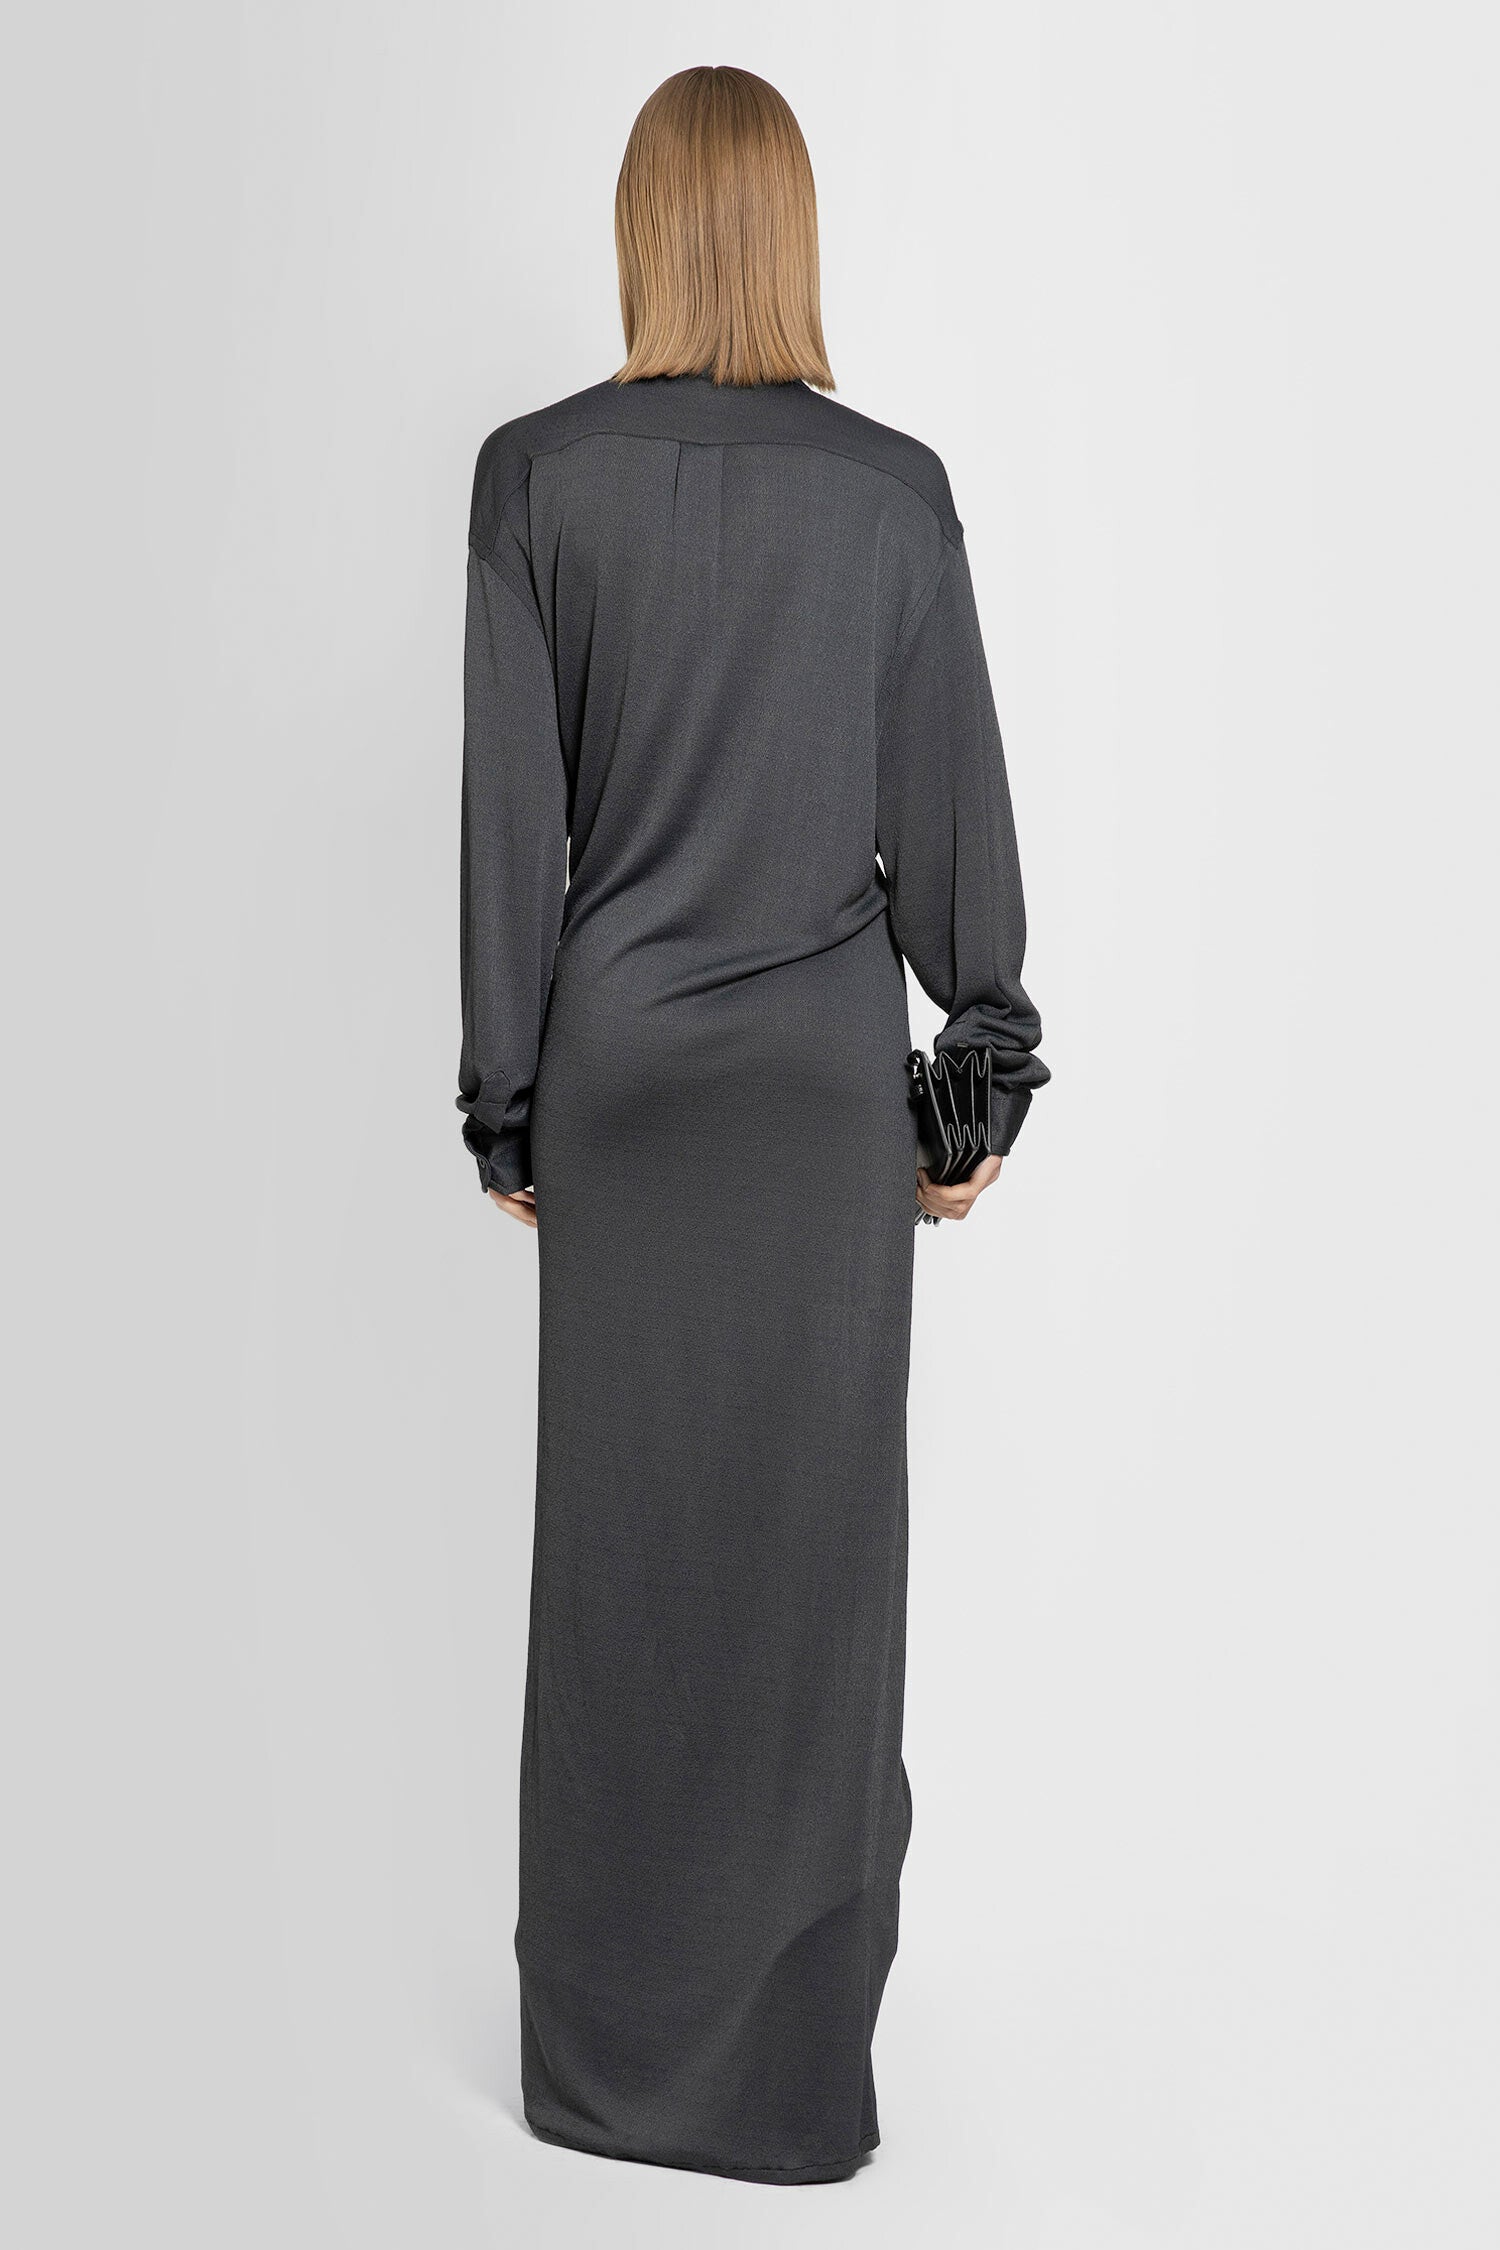 Y/PROJECT WOMAN GREY DRESSES